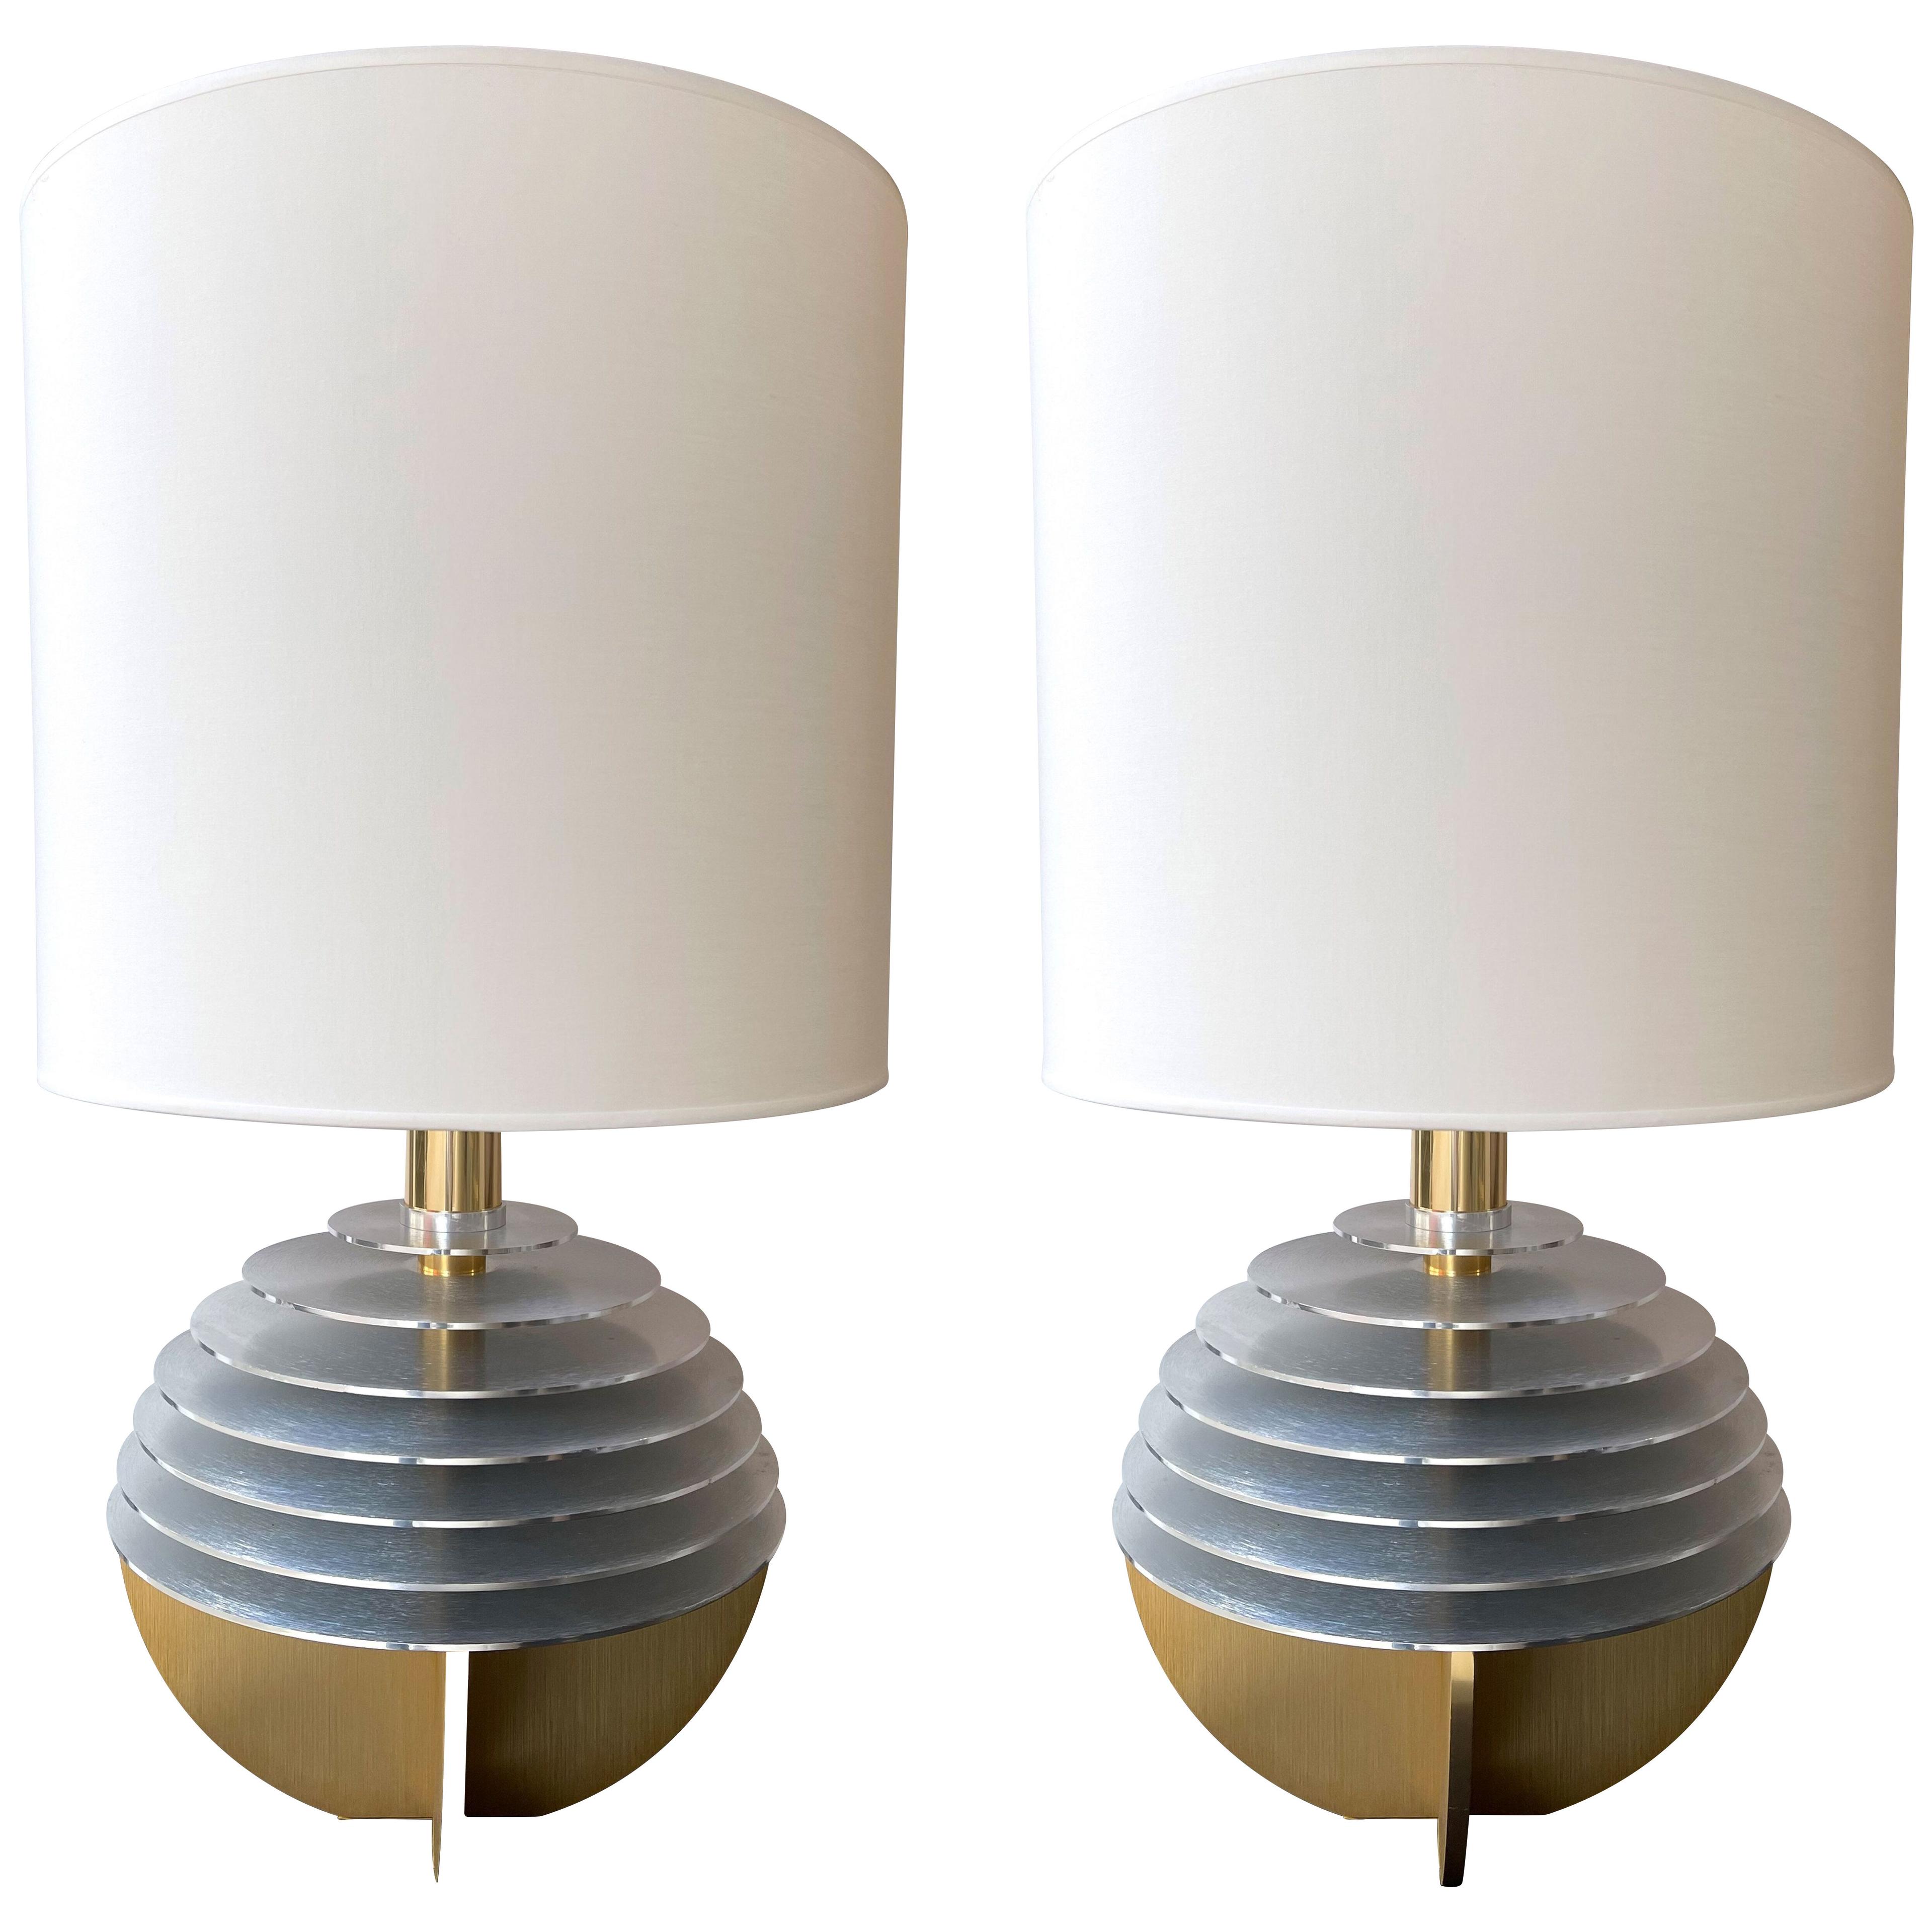 Pair of Metal and Brass Saturn Lamps by Banci. Italy, 1970s